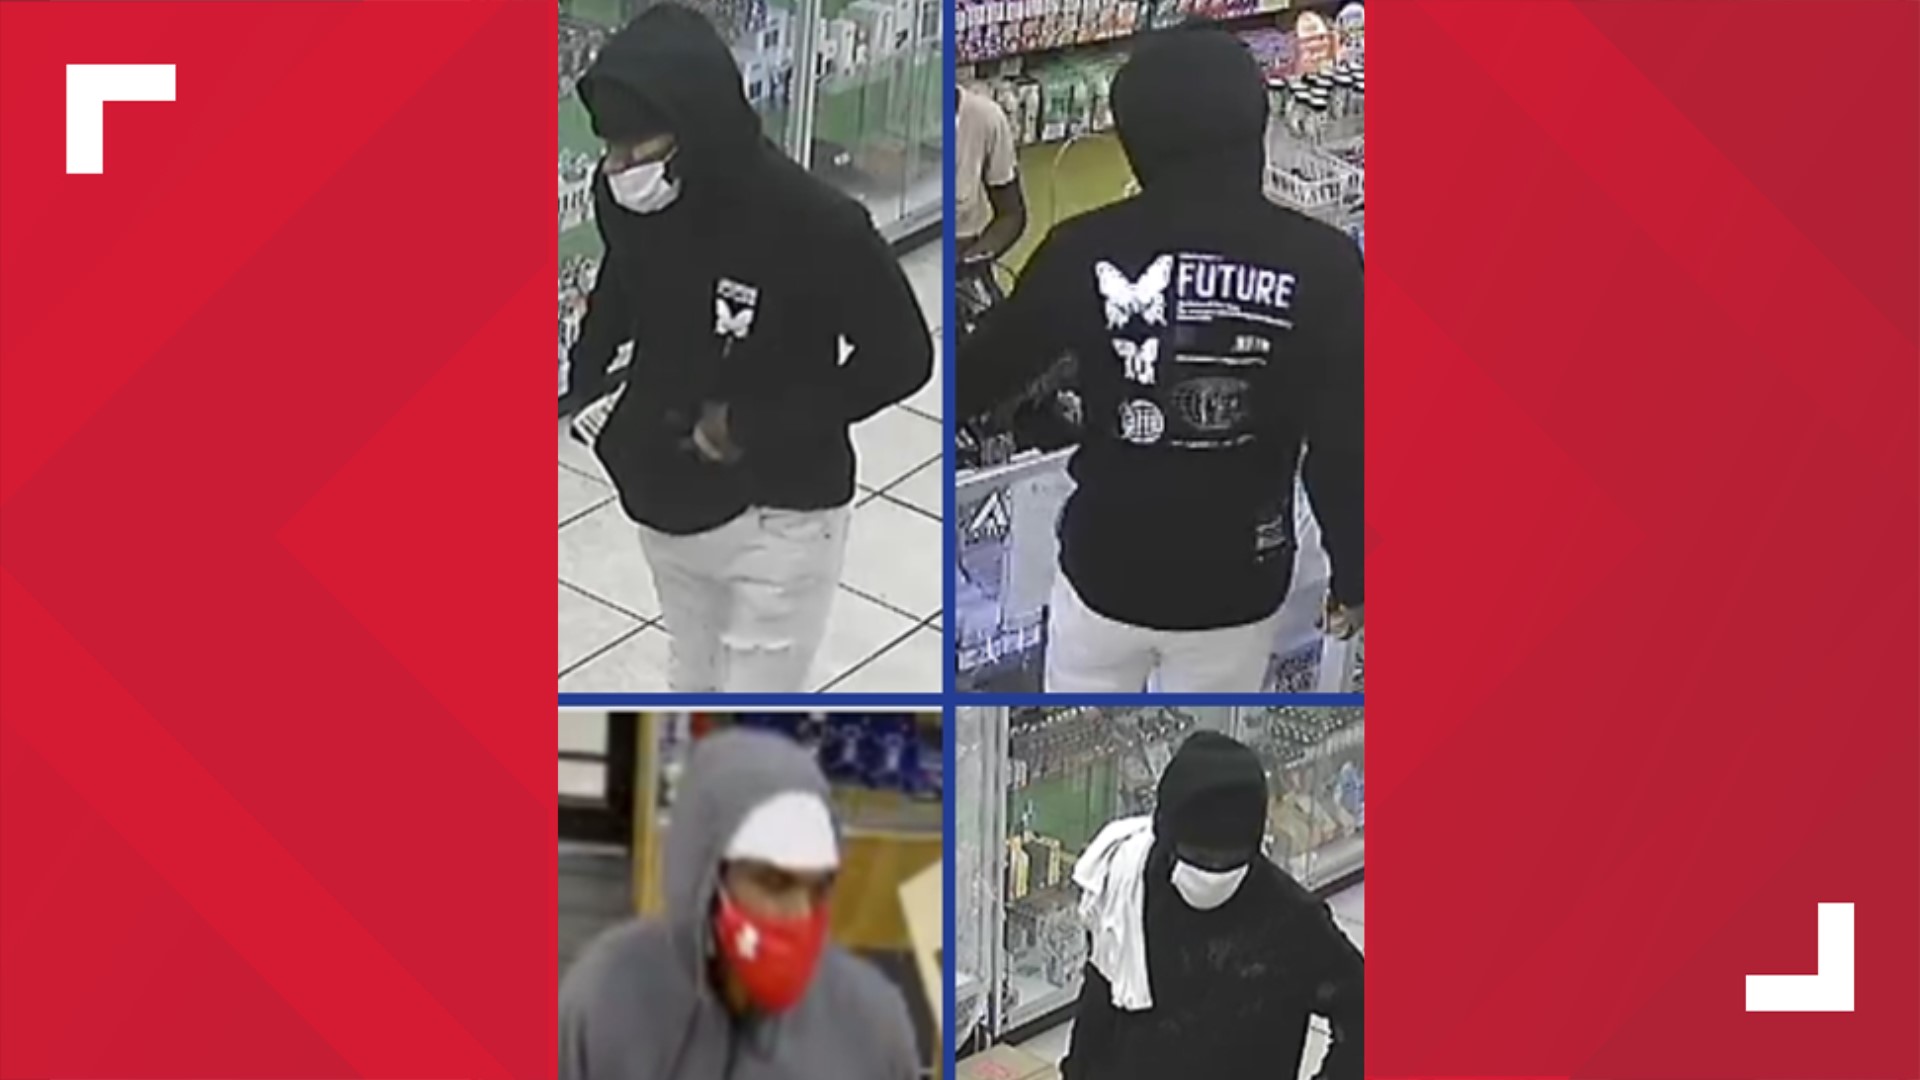 The suspect in the photos allegedly entered multiple businesses armed with a handgun and demanded money, according to JSO.